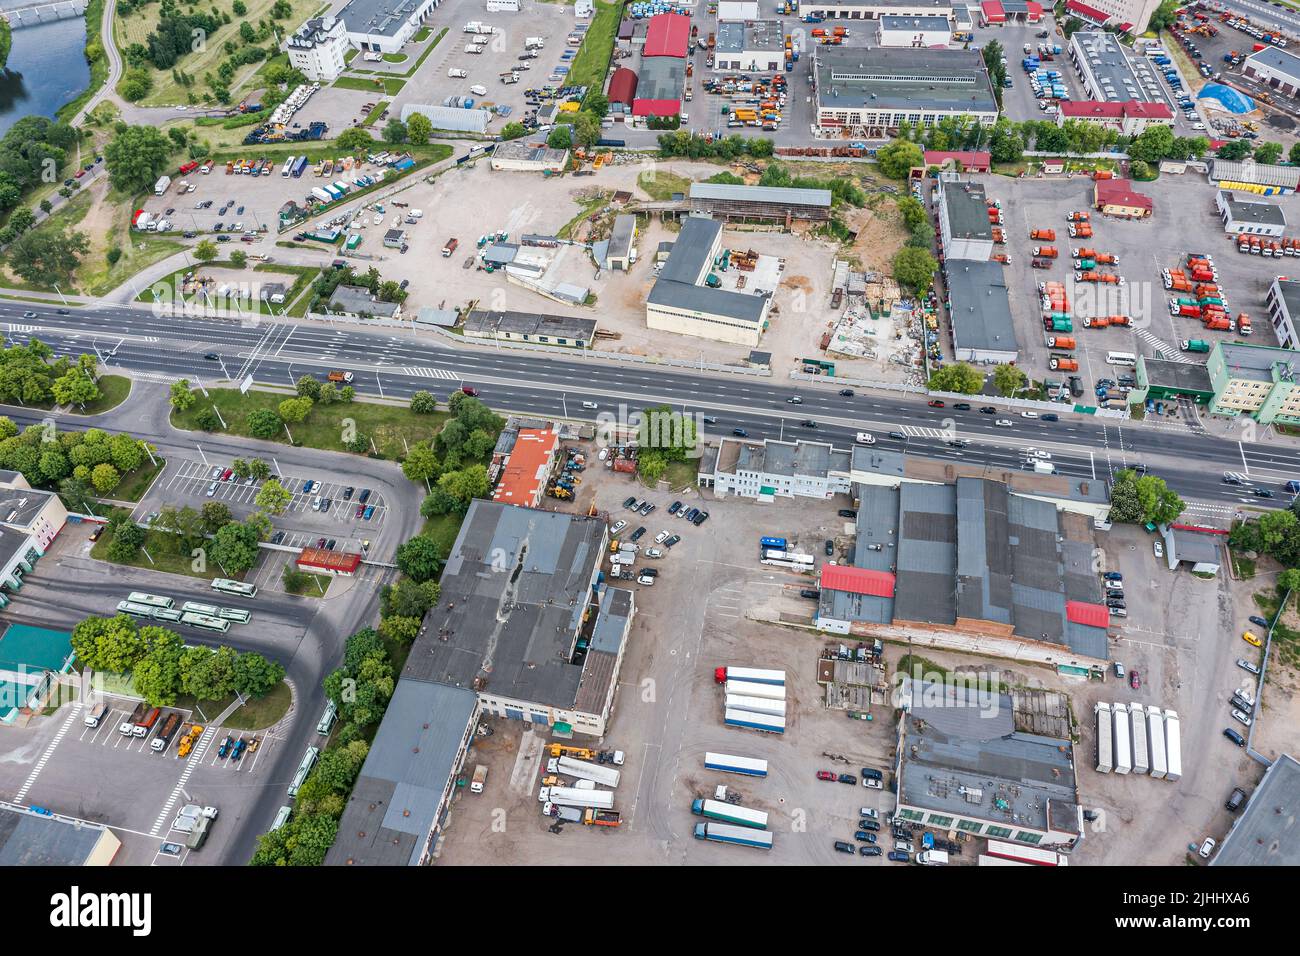 industrial area with many industrial buildings and warehouses. aerial view from flying drone. Stock Photo